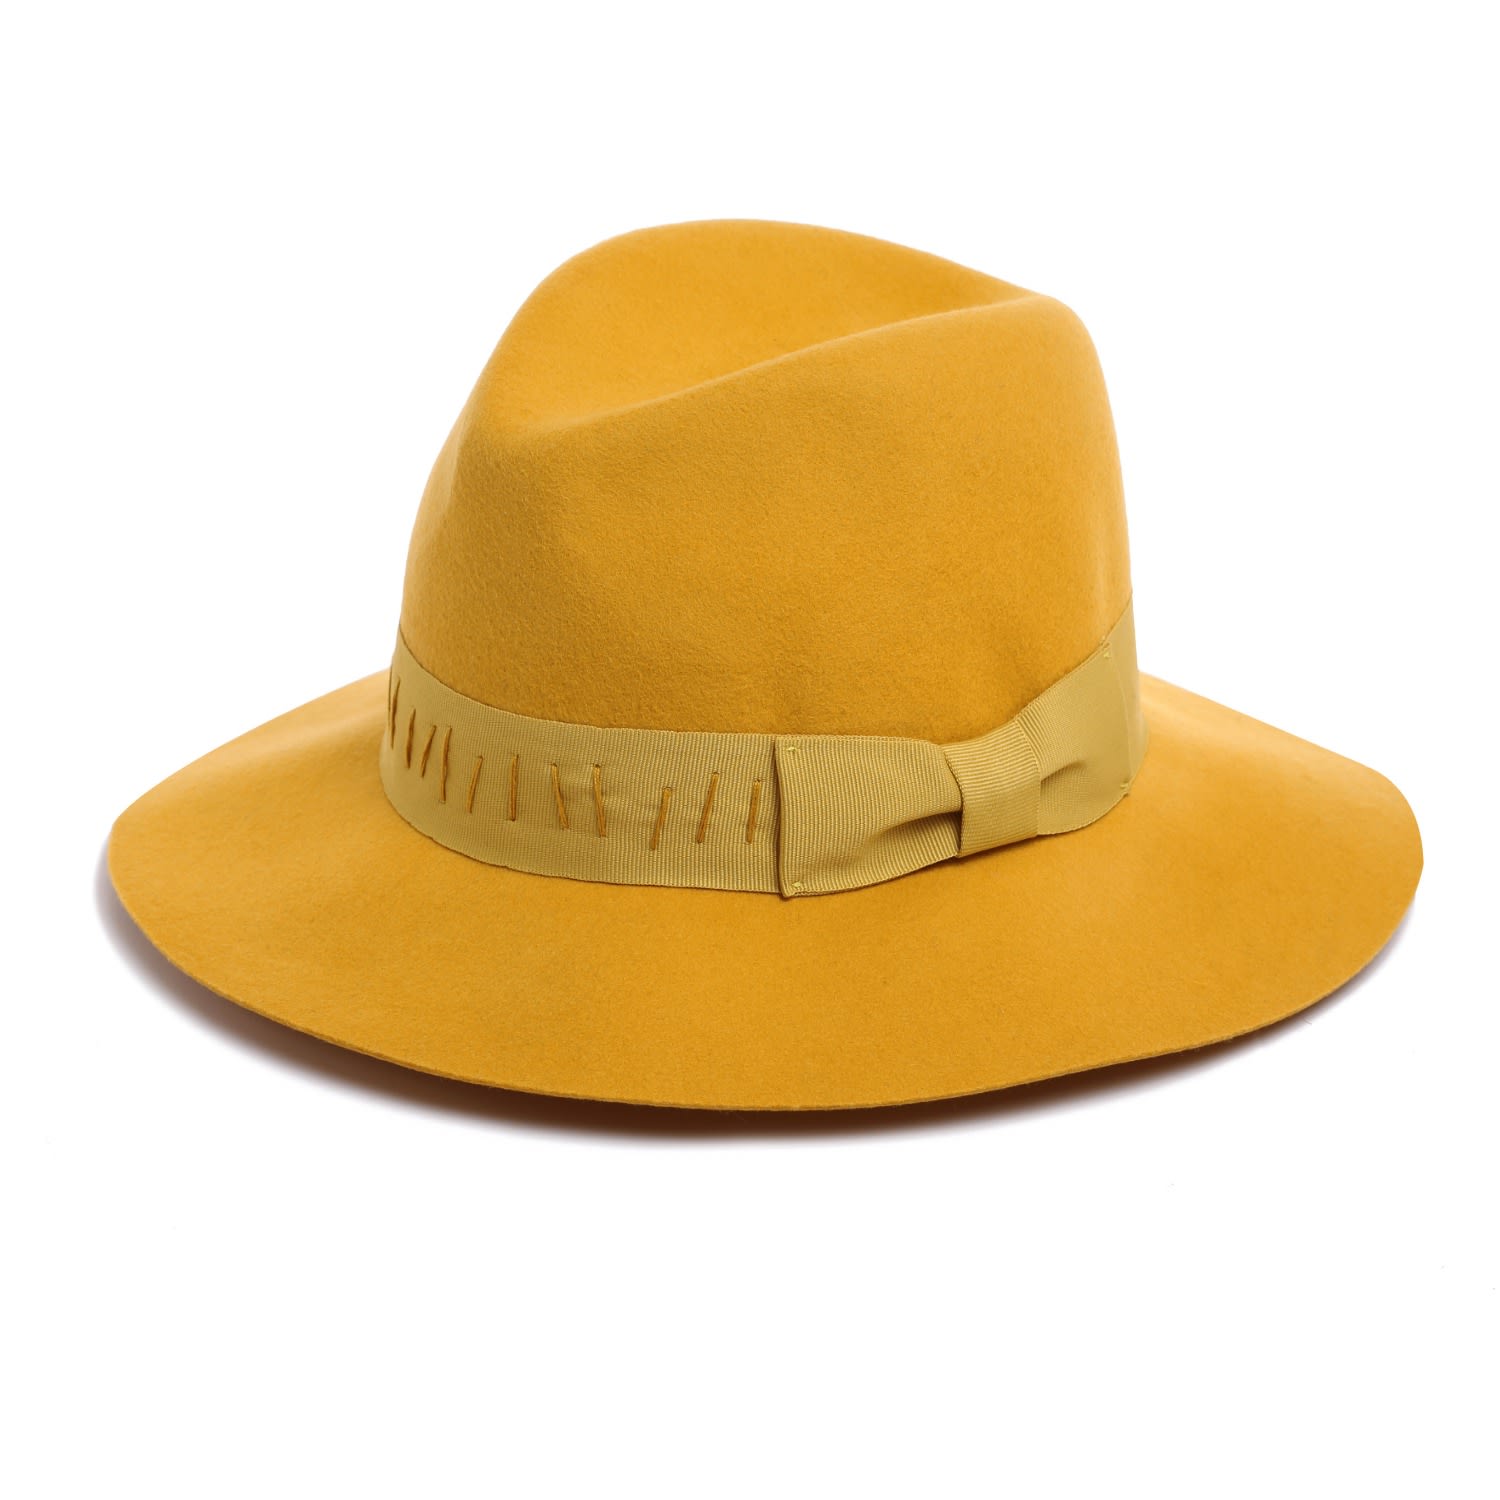 Justine Hats Women's Yellow / Orange Unique Felt Fedora With Embroidery Band